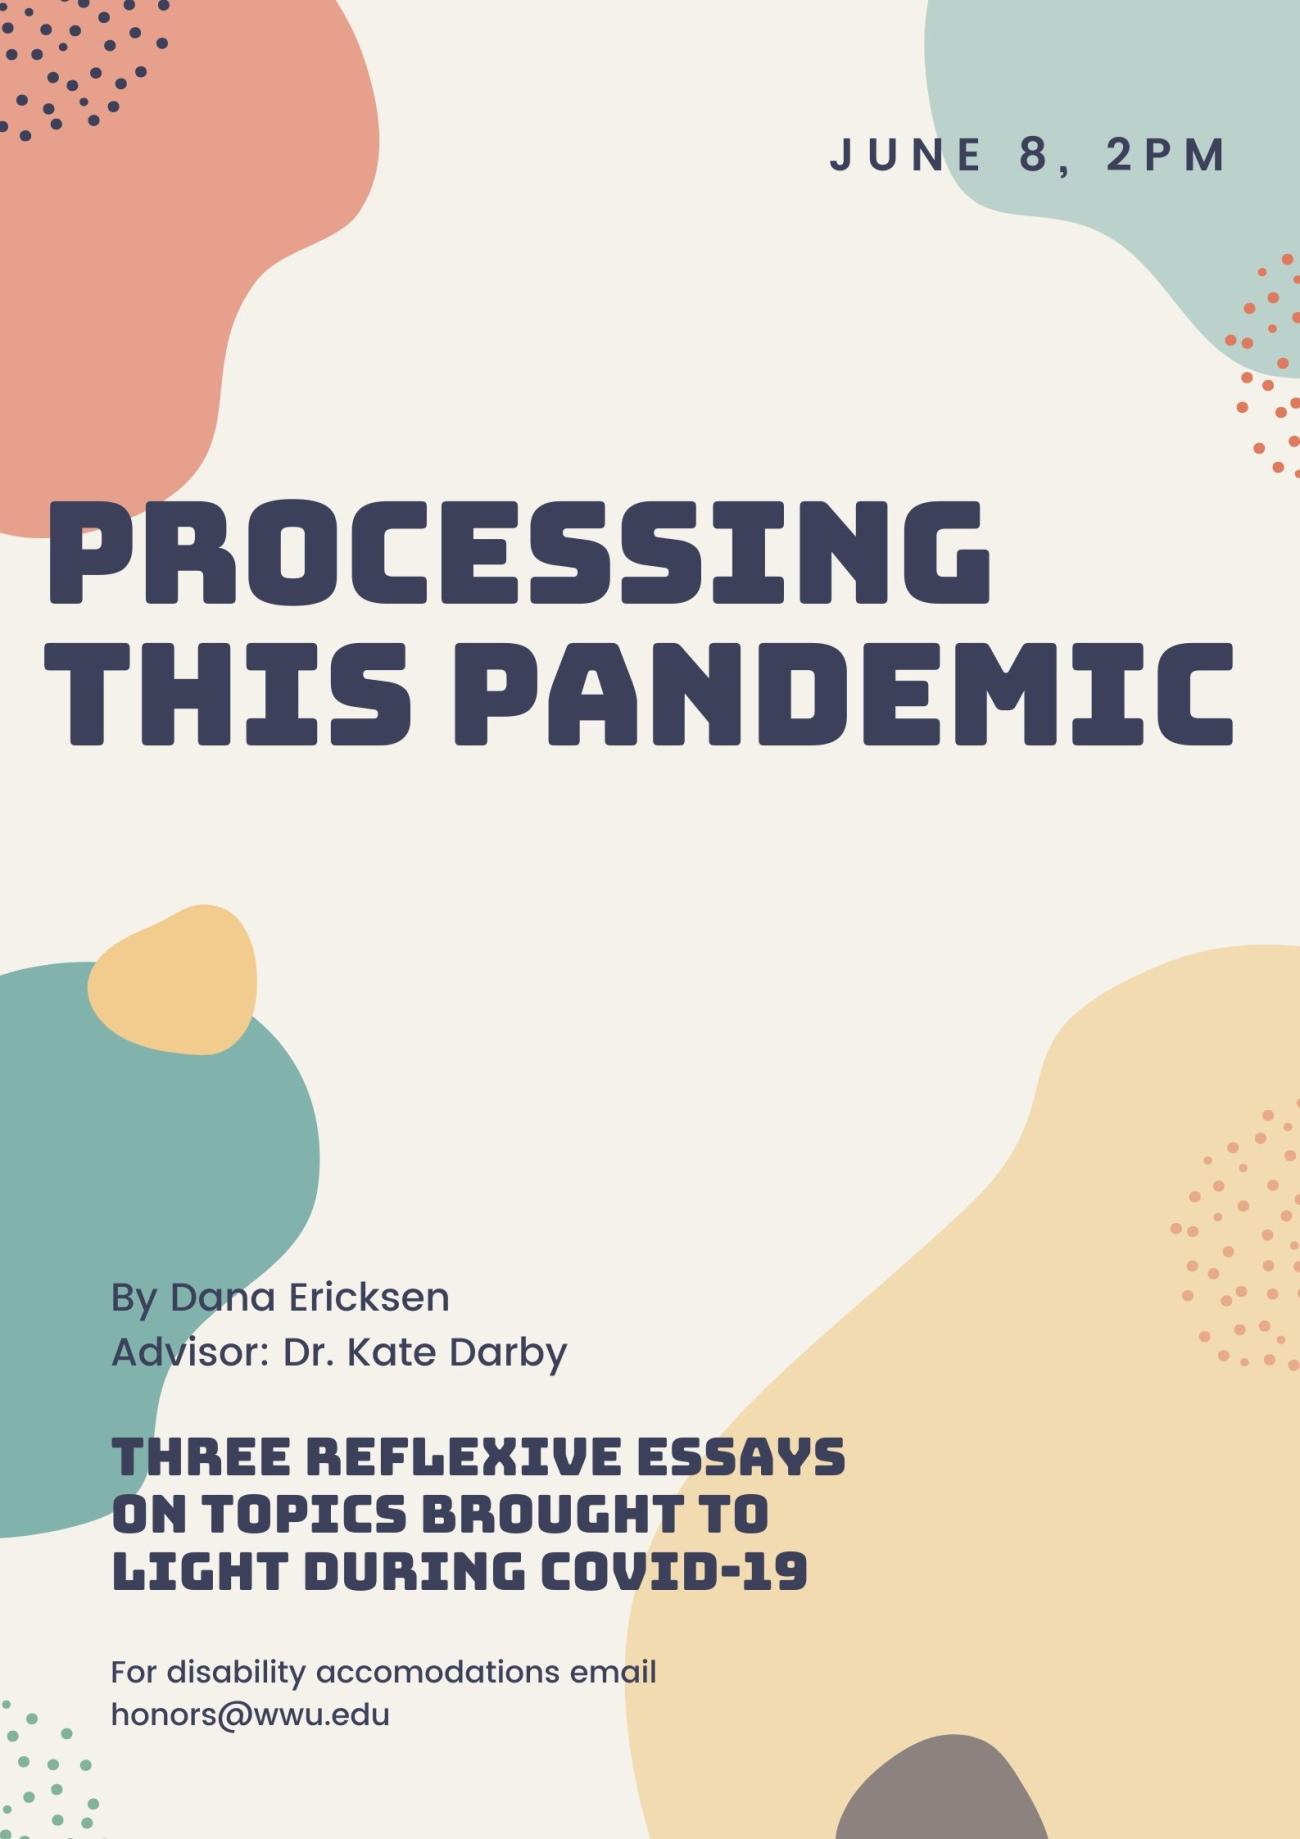 Image: An abstract colorful background with the text: "June 8, 2020"  "Processing this Pandemic"  "By Dana Ericksen, Advisor: Kate Darby"  "Three reflexive essays on topics brought to light during COVID-19"  "For disability accommodations email honors@wwu.edu"